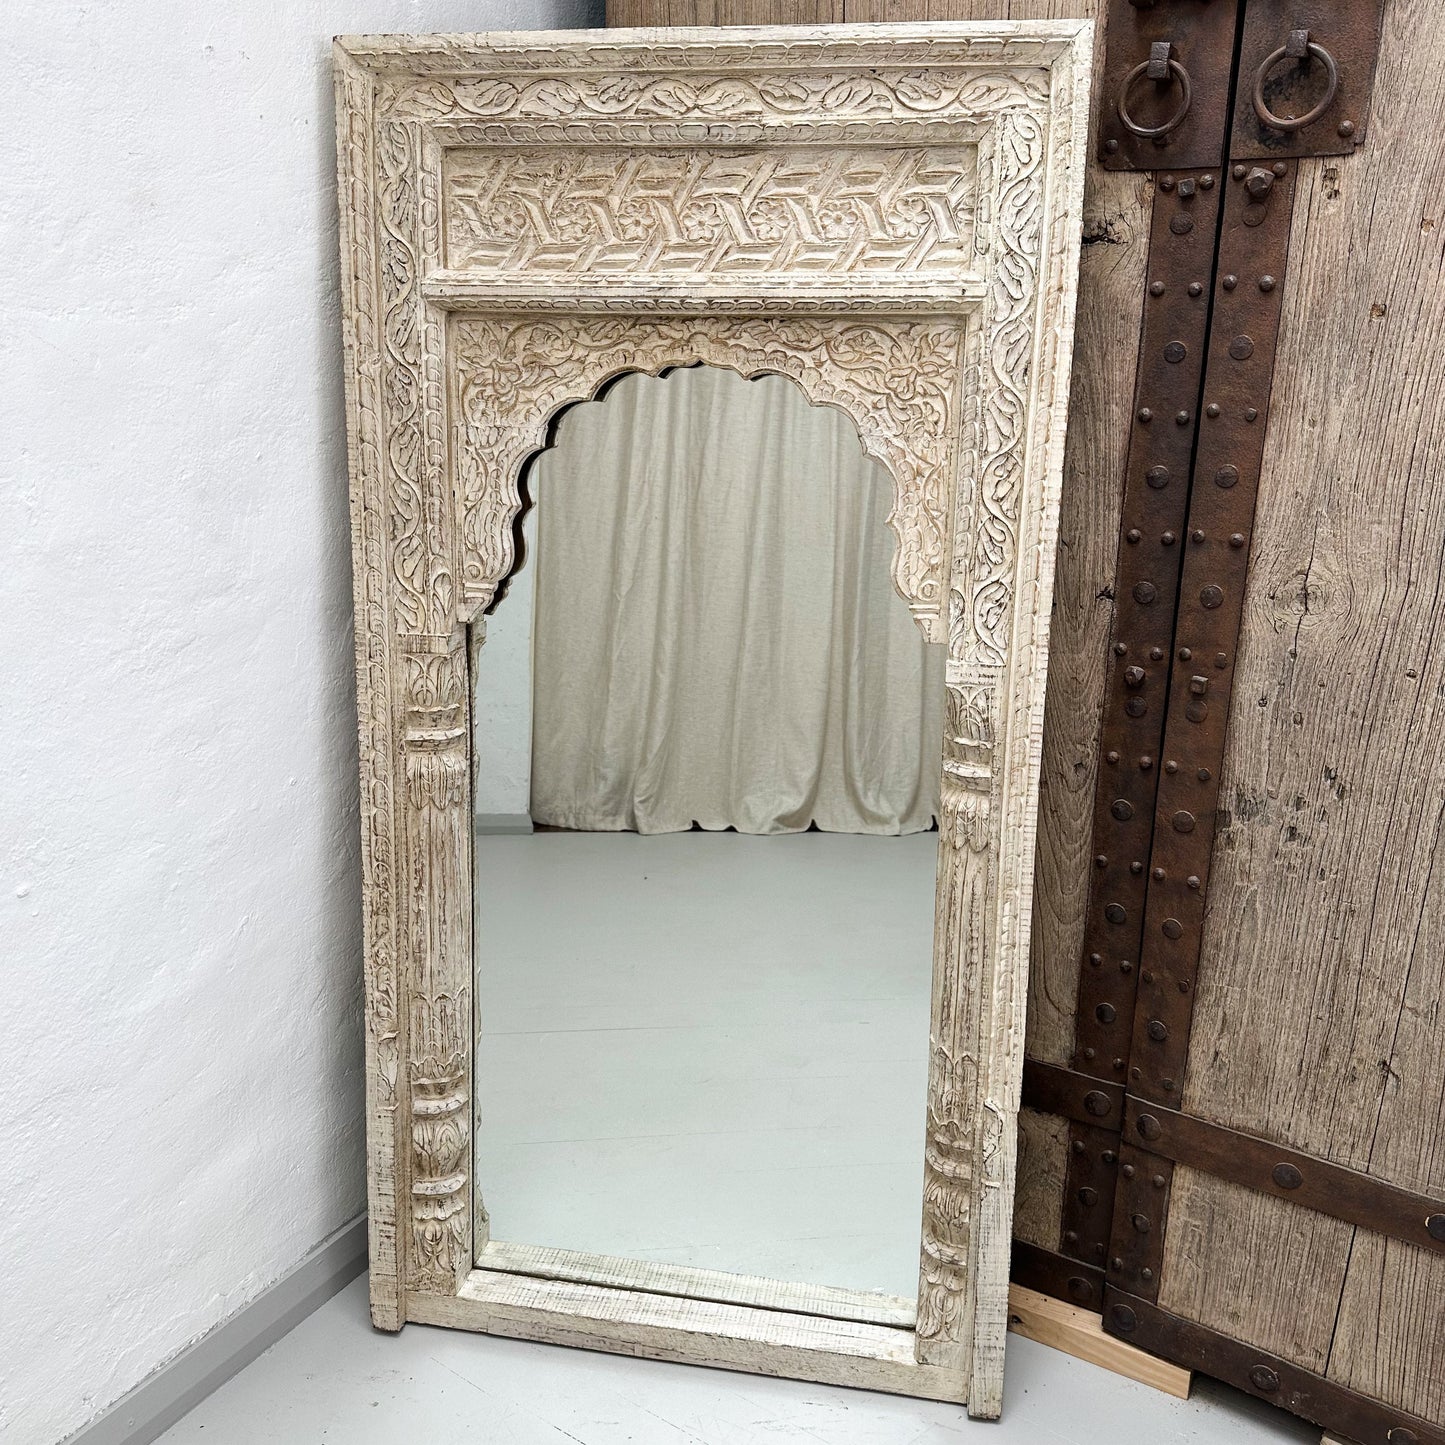 Rajasthan Arched Mirror